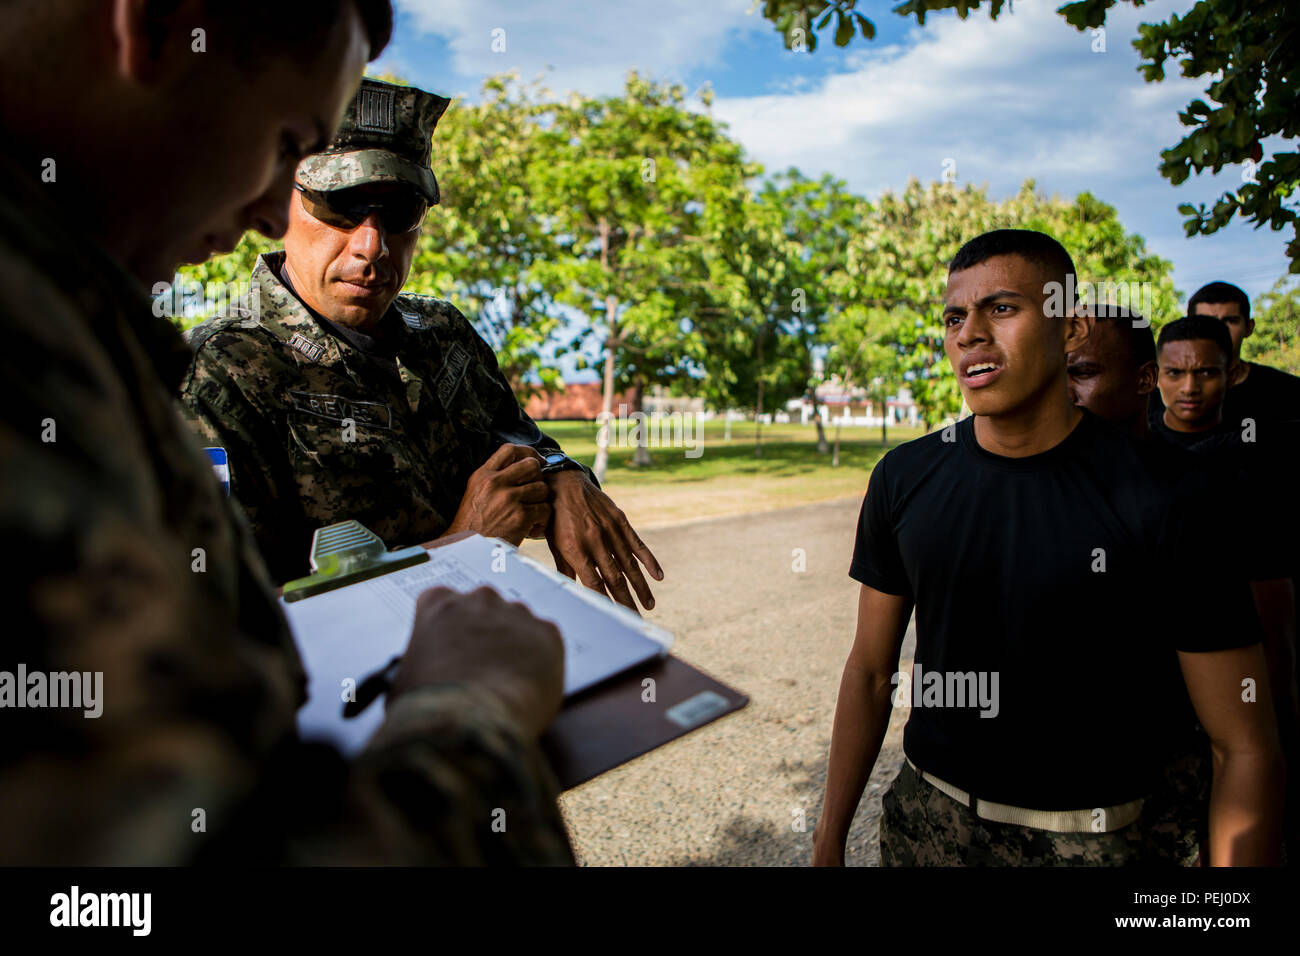 U.S. Marine Corps Cpl. Diego Rendon, left, the team leader for Security Cooperation Team-Honduras, Special Purpose Marine Air-Ground Task Force-Southern Command takes down scores for Honduran marines after the 880-meter portion of the combat fitness test at Naval Base Puerto Castilla, Honduras, Aug. 12, 2015. SCT-Honduras is currently deployed as part of the SPMAGTF-SC to assist the Centro de Adiestramiento Naval with implementing a training curriculum to create a Honduran marine Program.  (U.S. Marine Corps Photo by Cpl. Katelyn Hunter/Released). Stock Photo